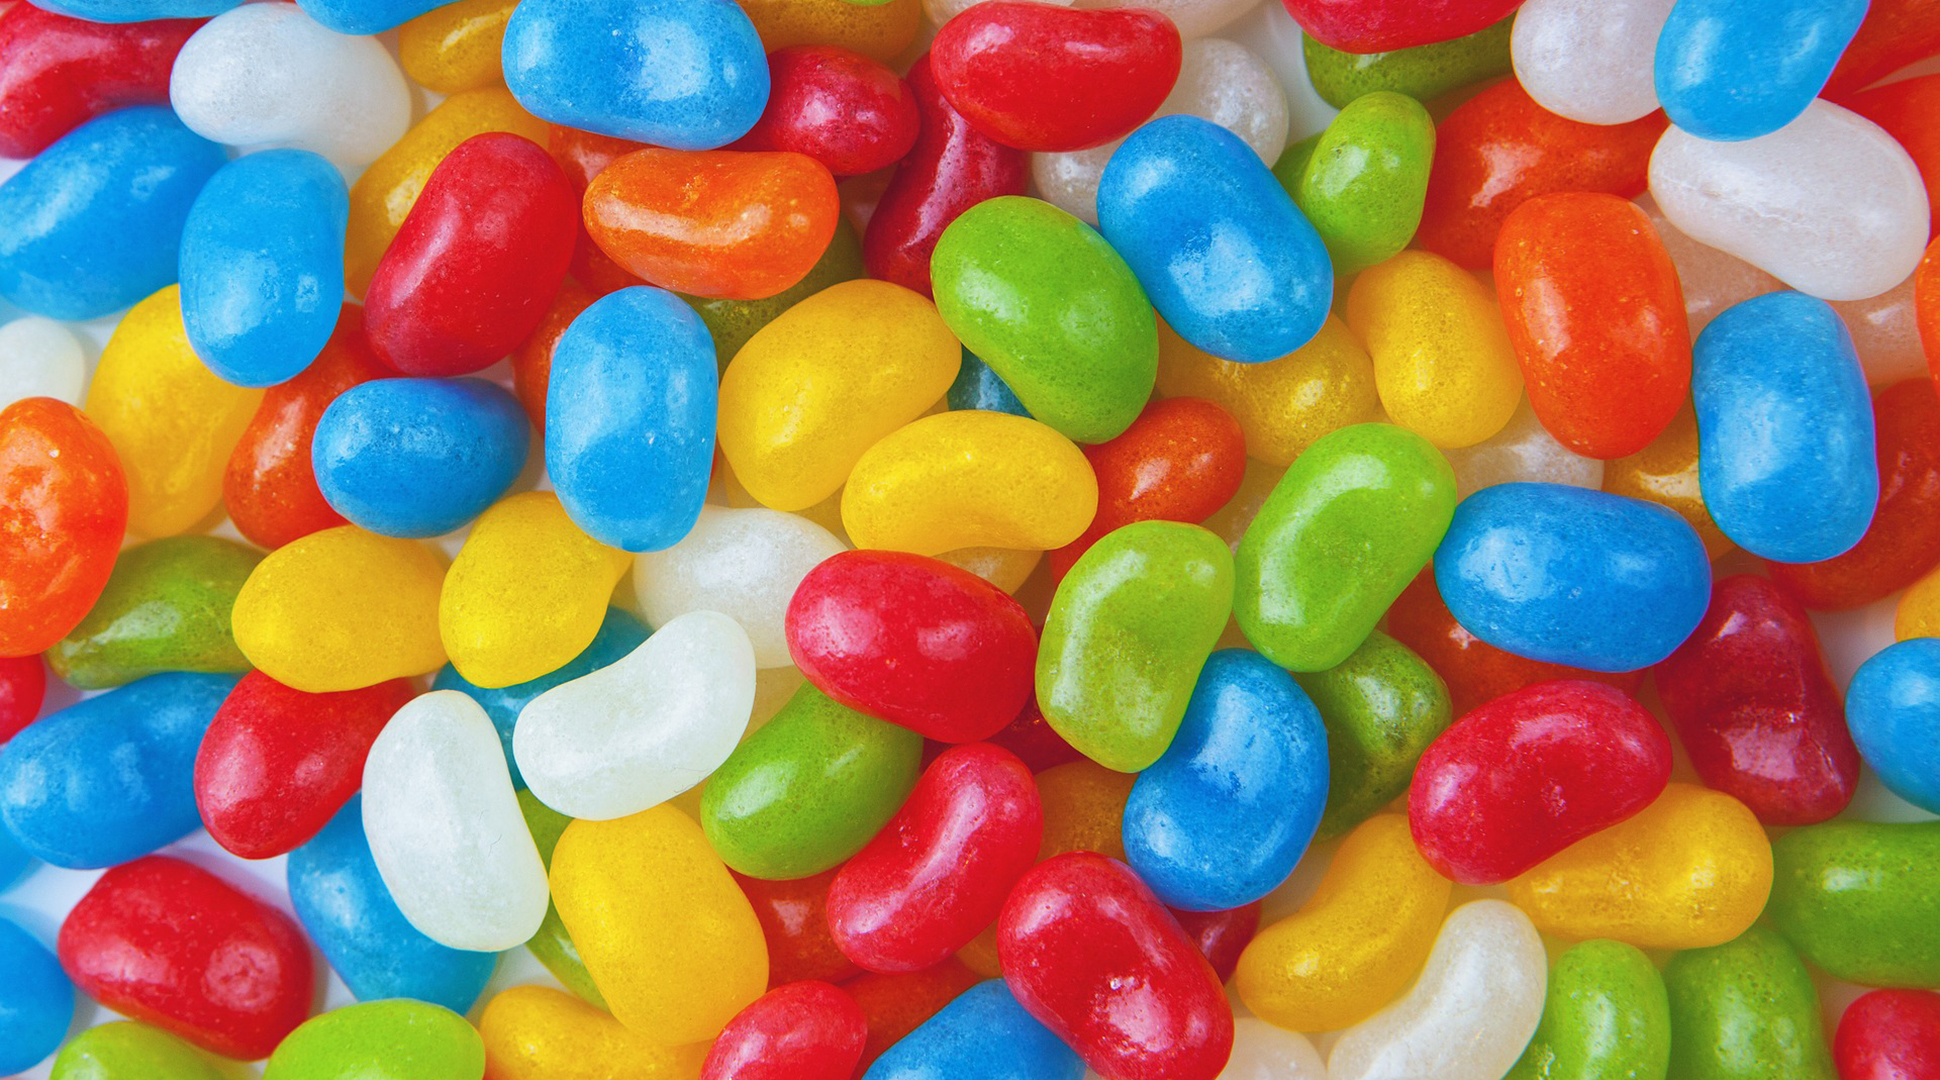 Are you concerned about artificial dyes?